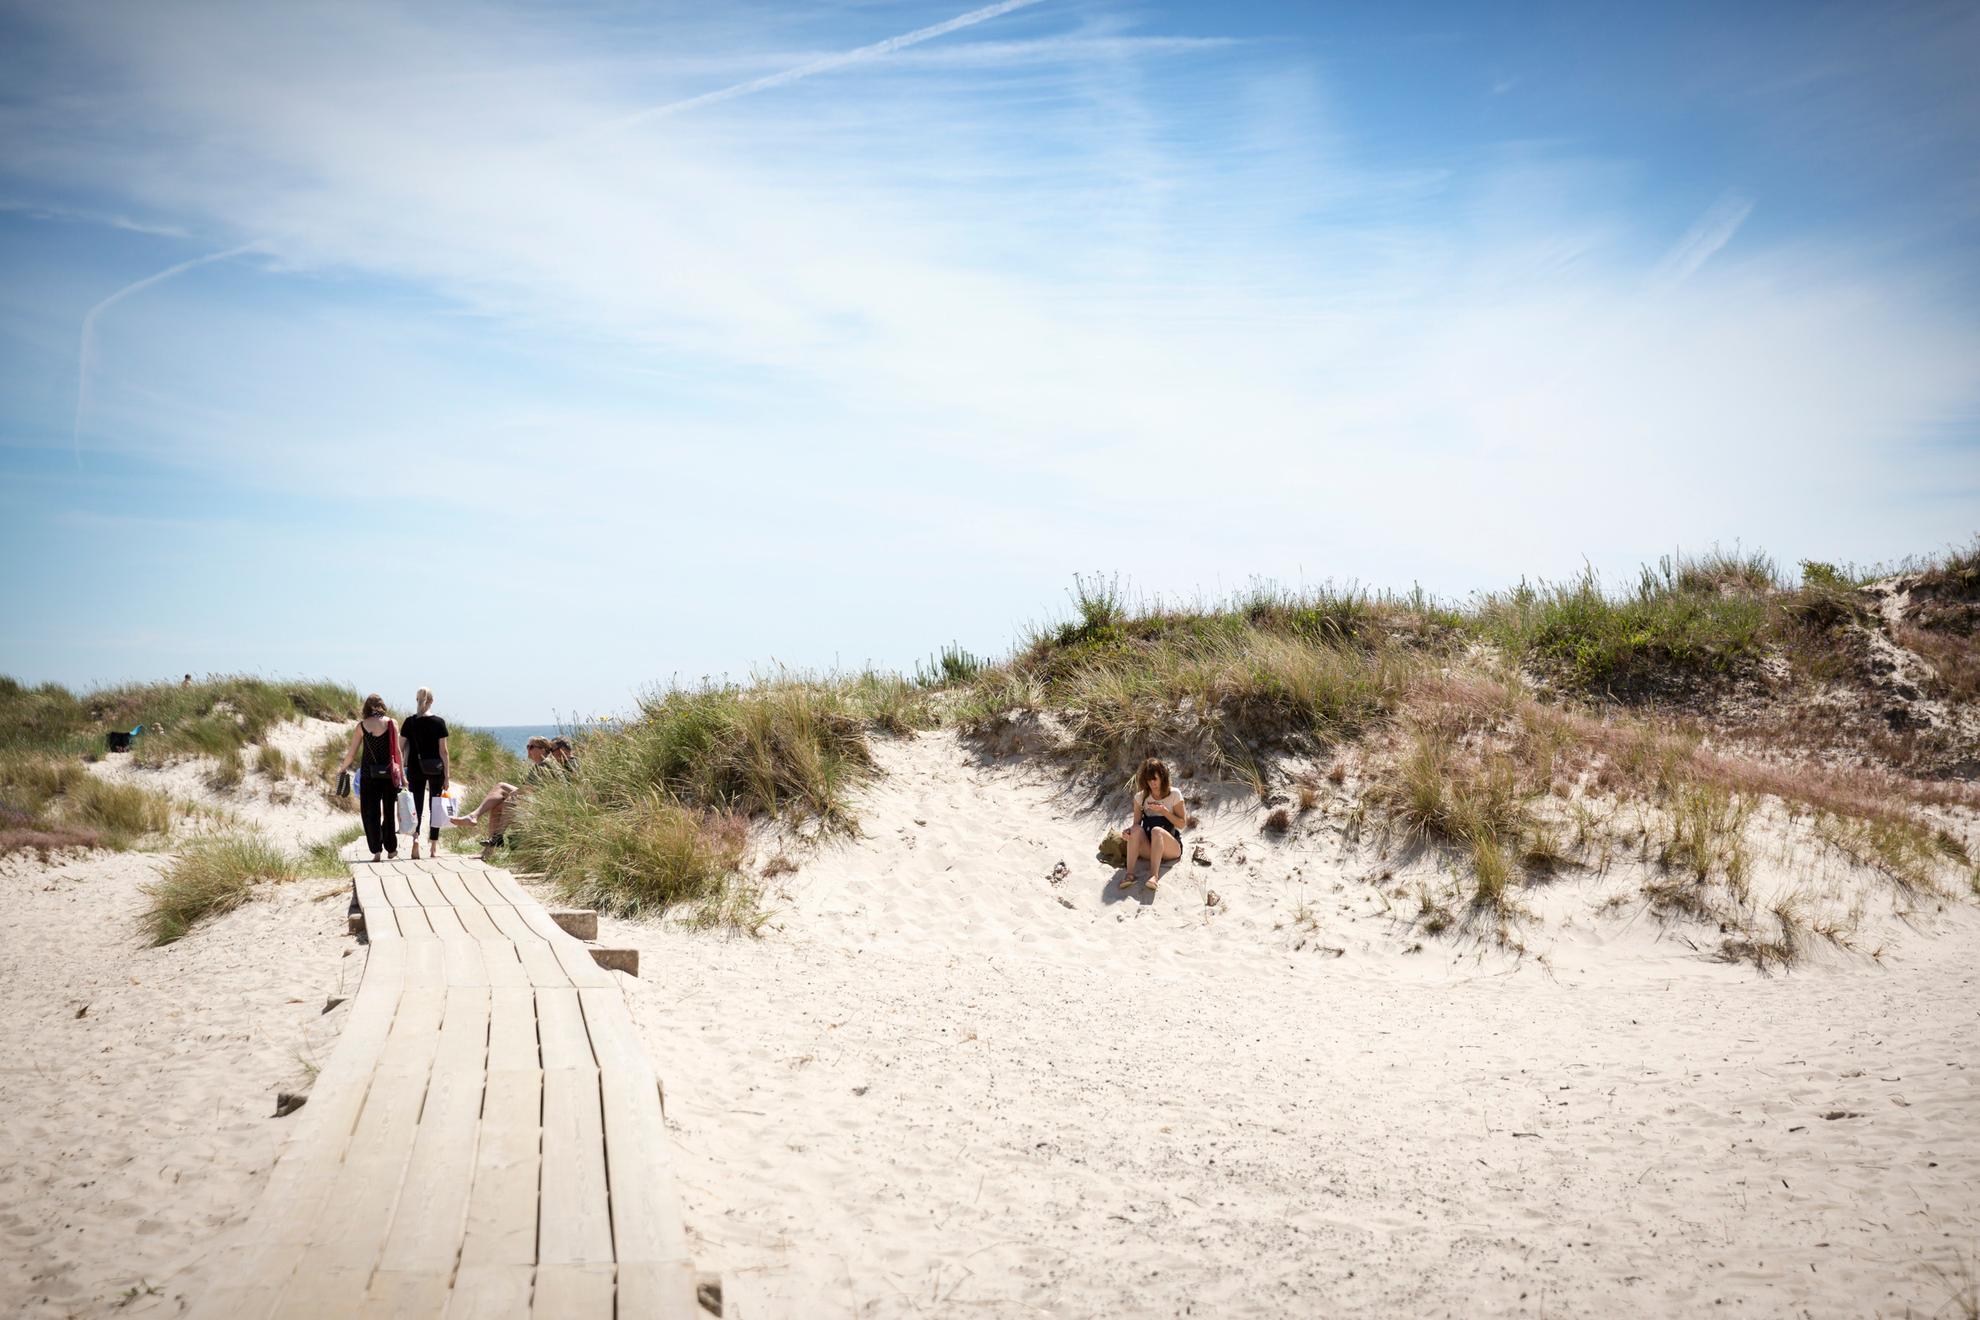 A wooden walkway crosses white sand dunes with tufts of grass.